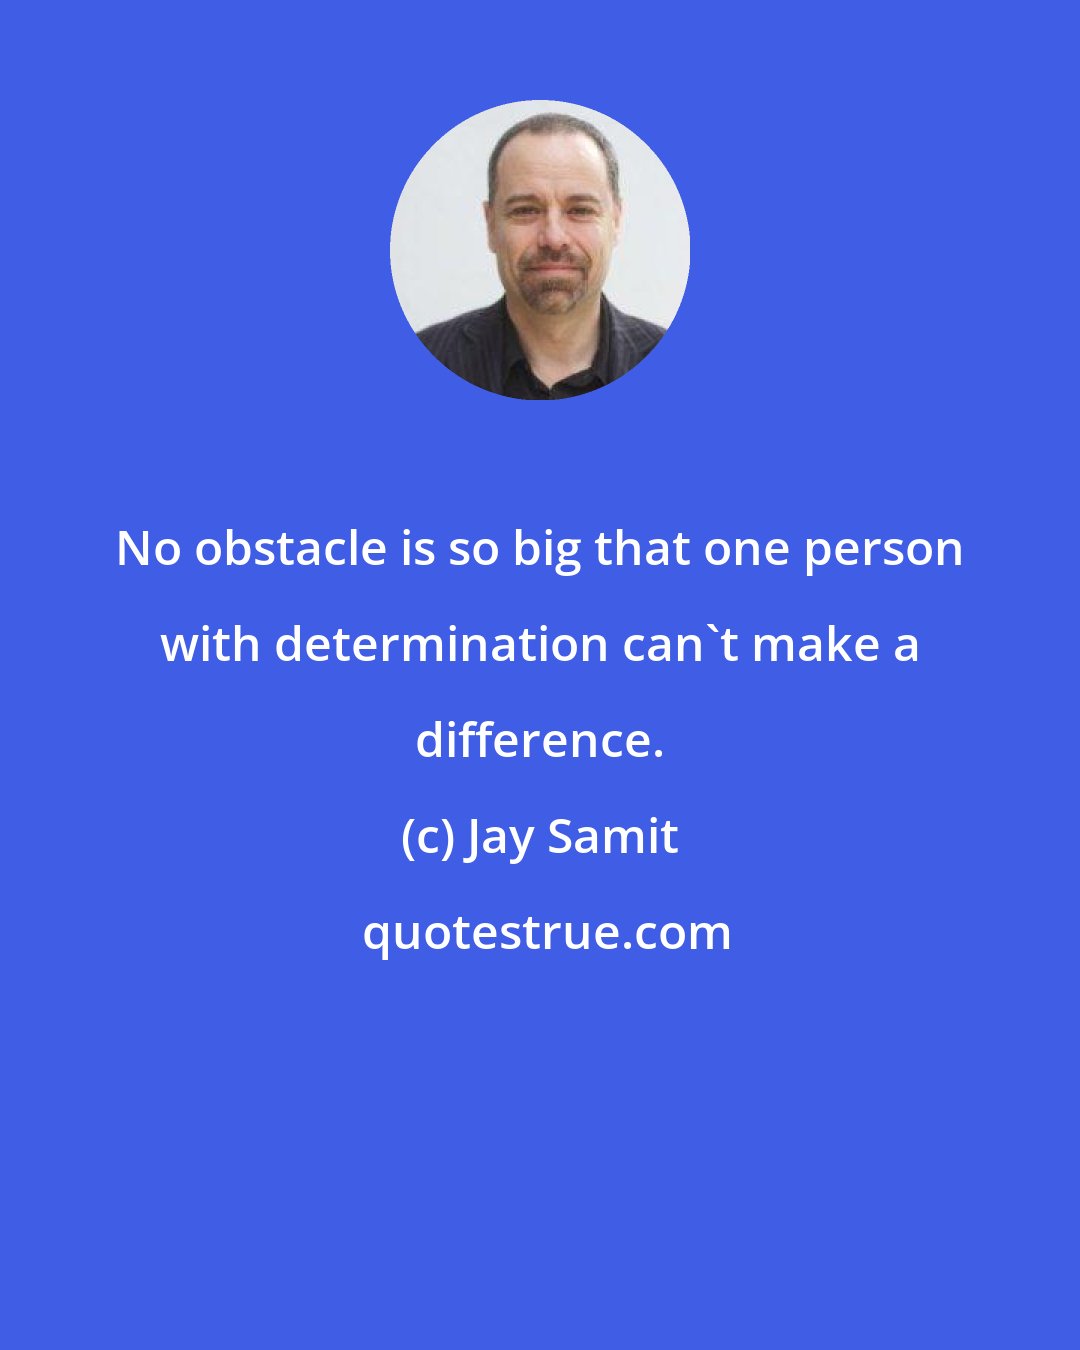 Jay Samit: No obstacle is so big that one person with determination can't make a difference.